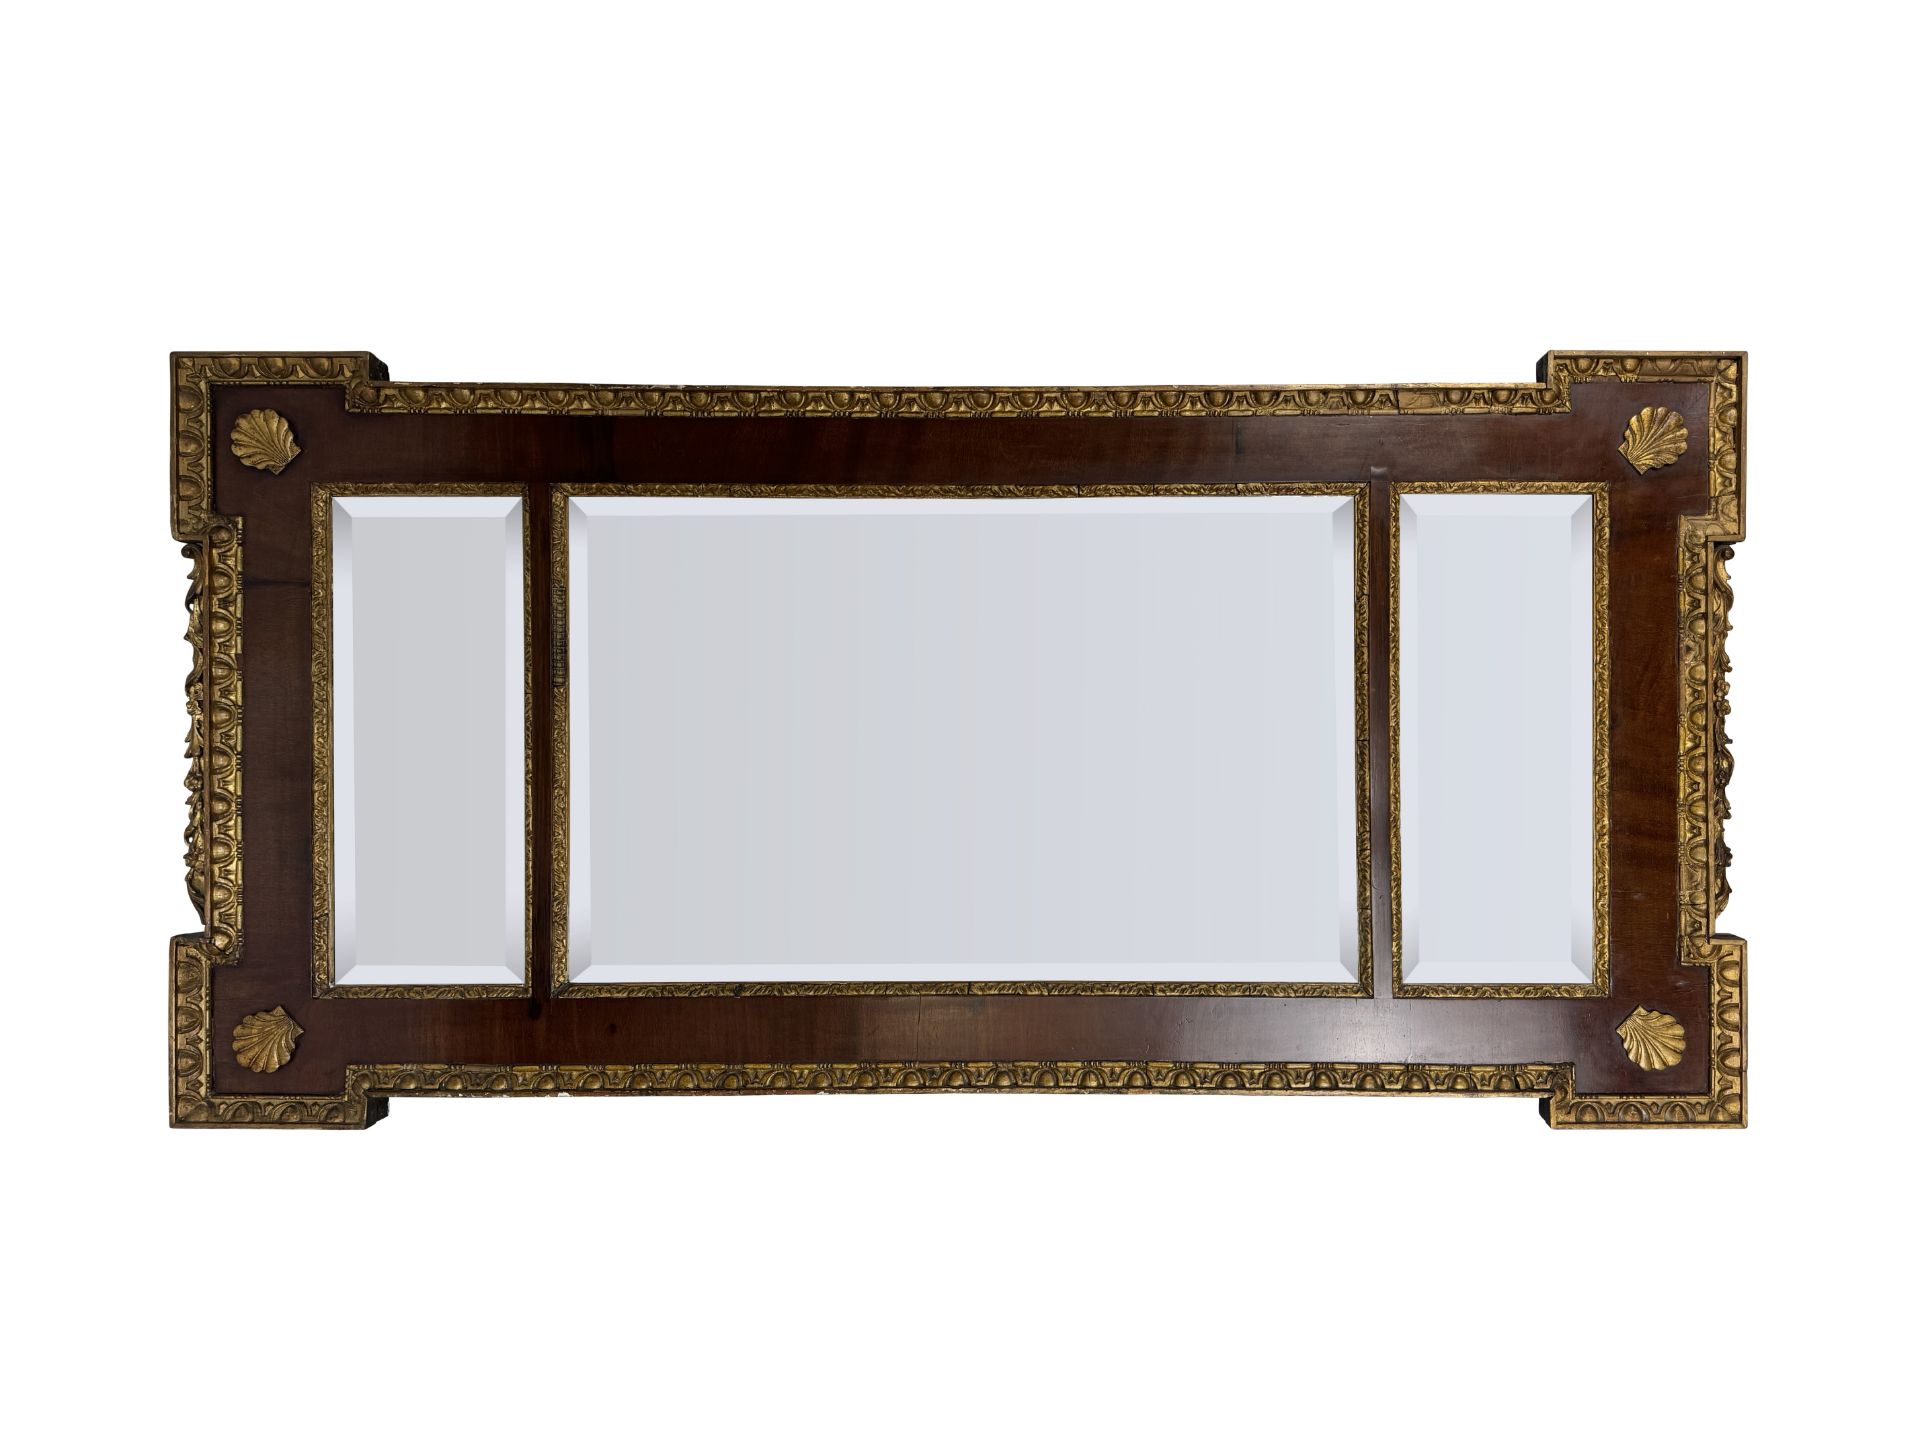 A George II style mahogany and parcel gilt triple plate landscape mirror